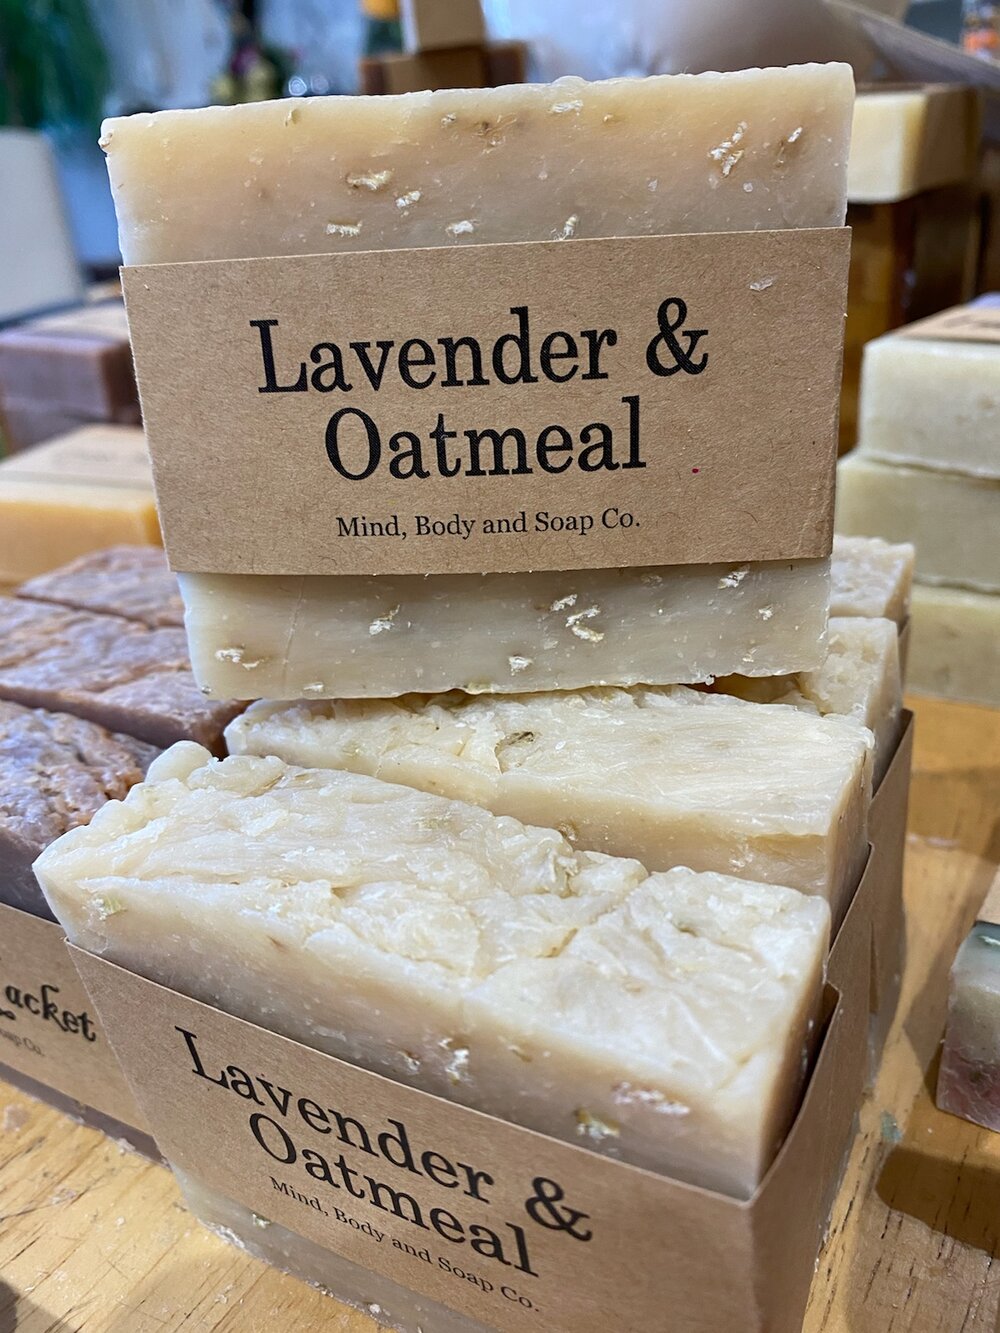 Lavender & Oatmeal Soap — Mind, Body and Soap Co.